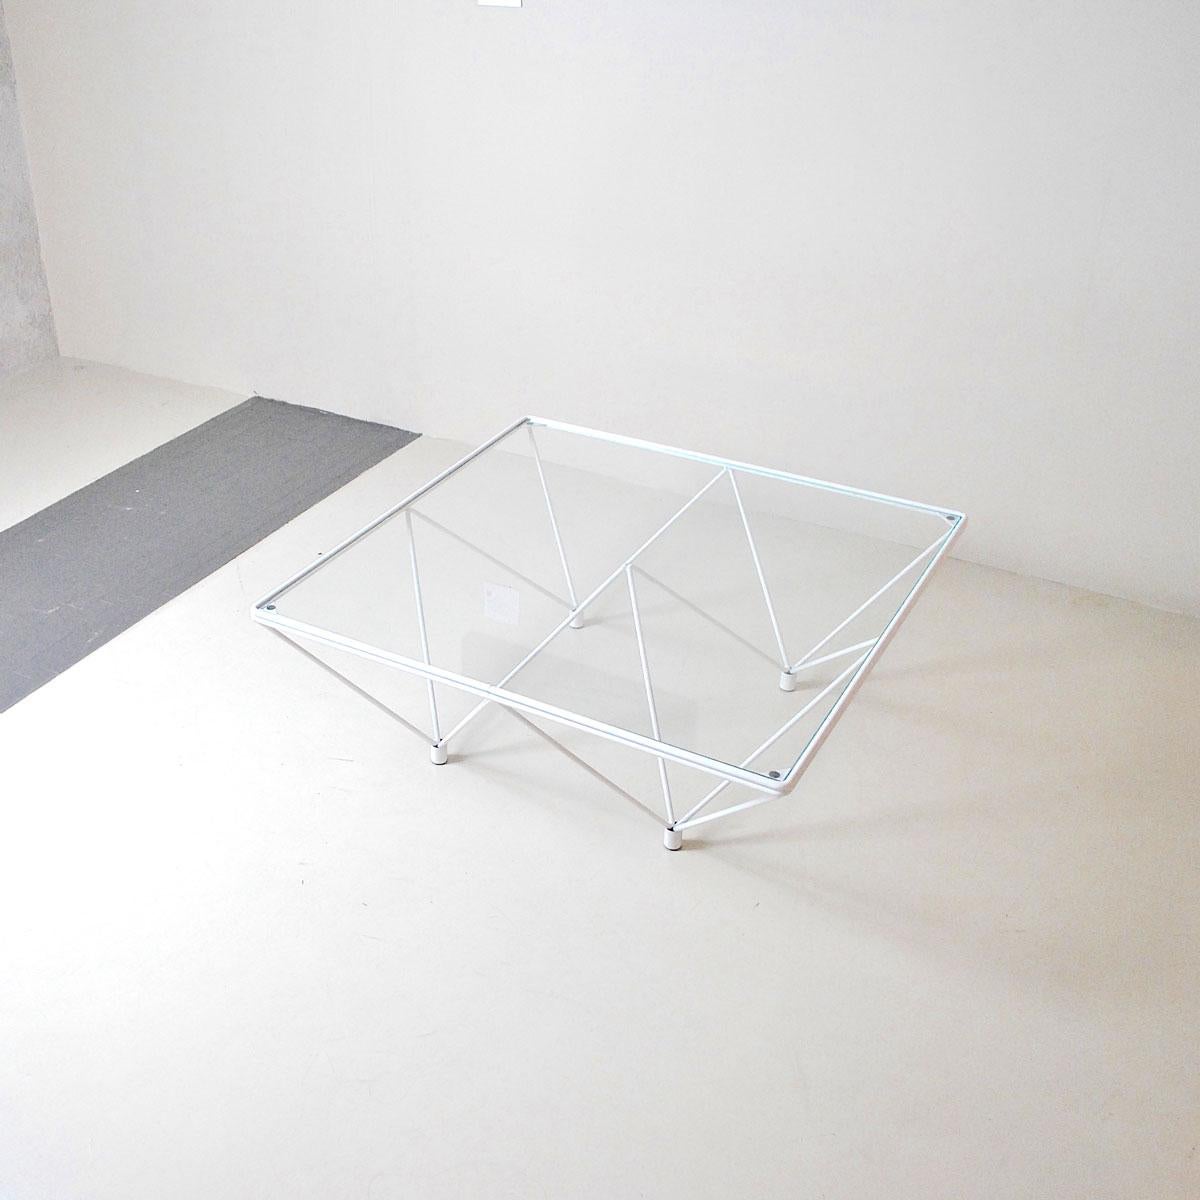 A particular type of Alanda coffee table in white color by Paolo Piva for B&B